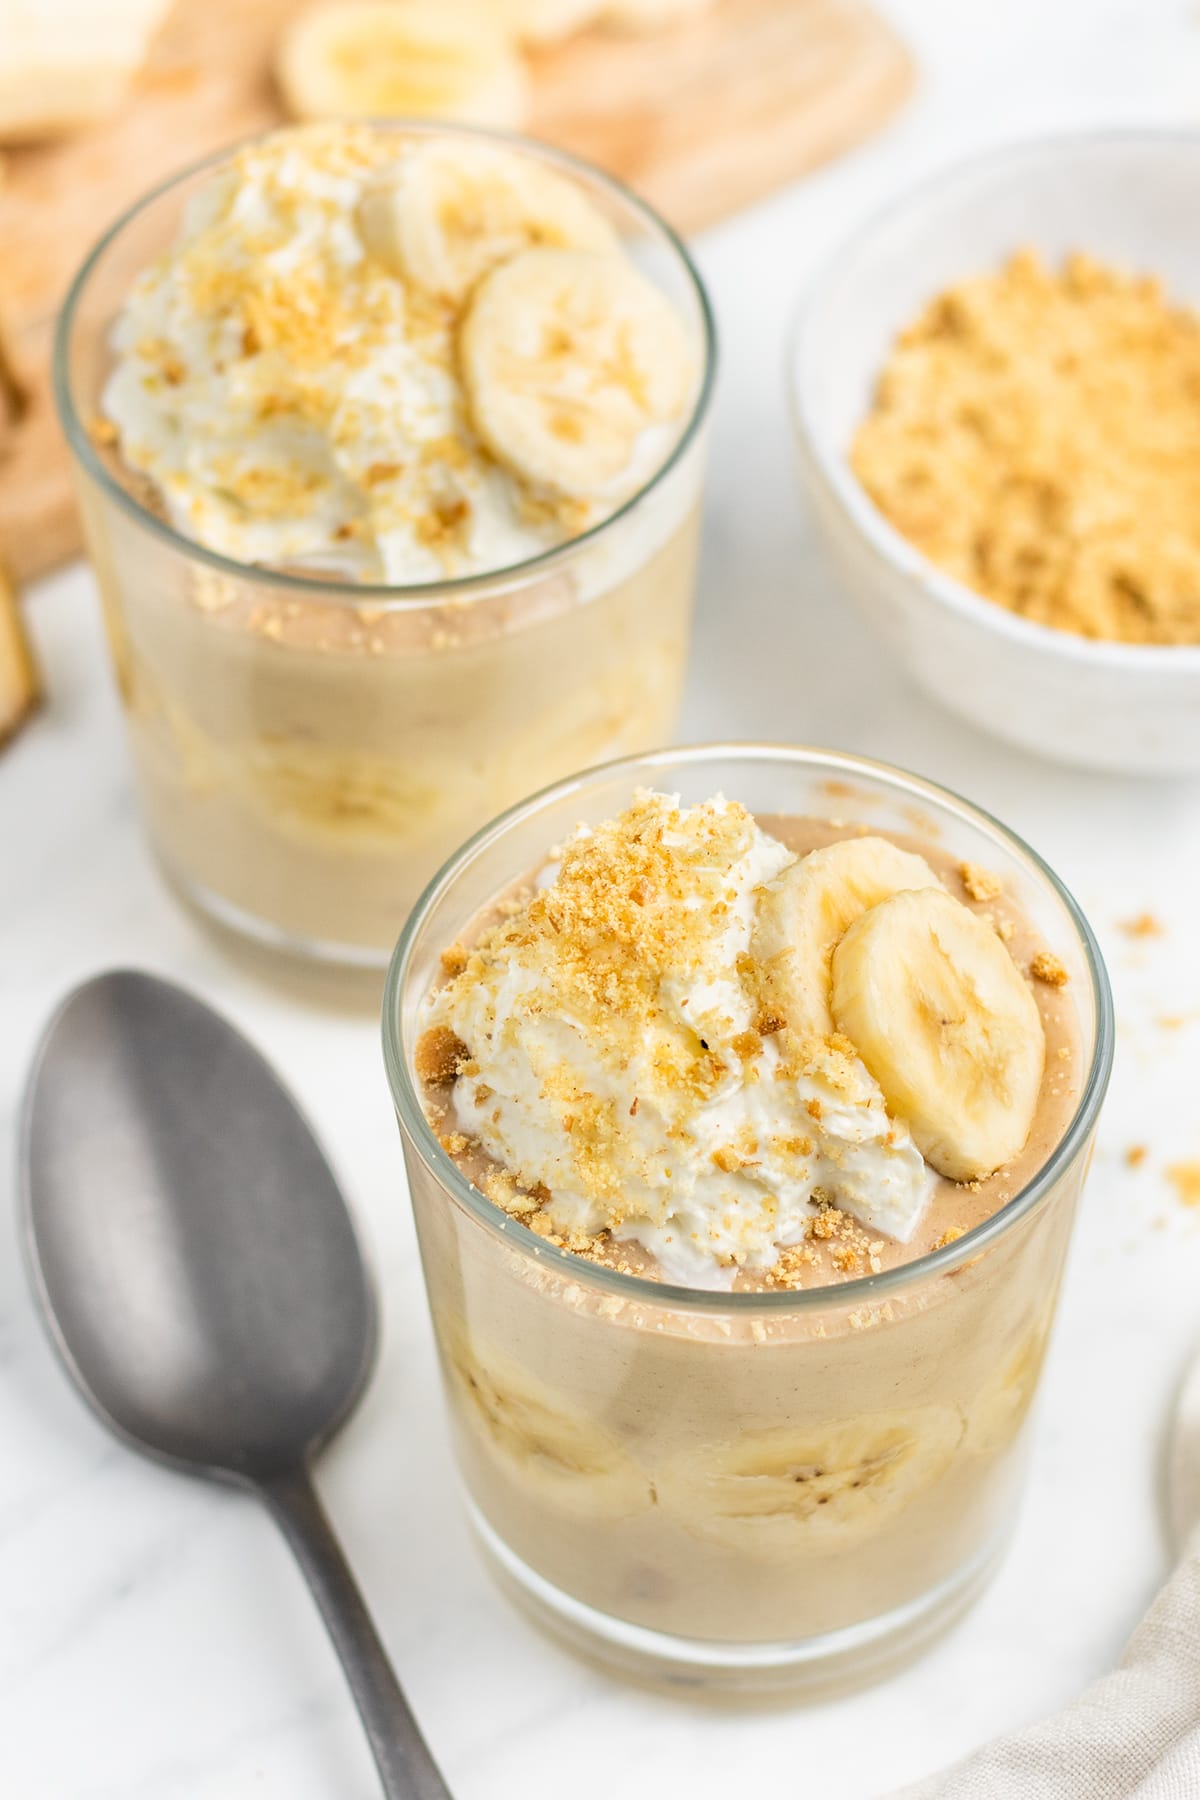 Overhead, angled view of two glass cups of 3-ingredient banana pudding topped with banana slices and whipped cream.